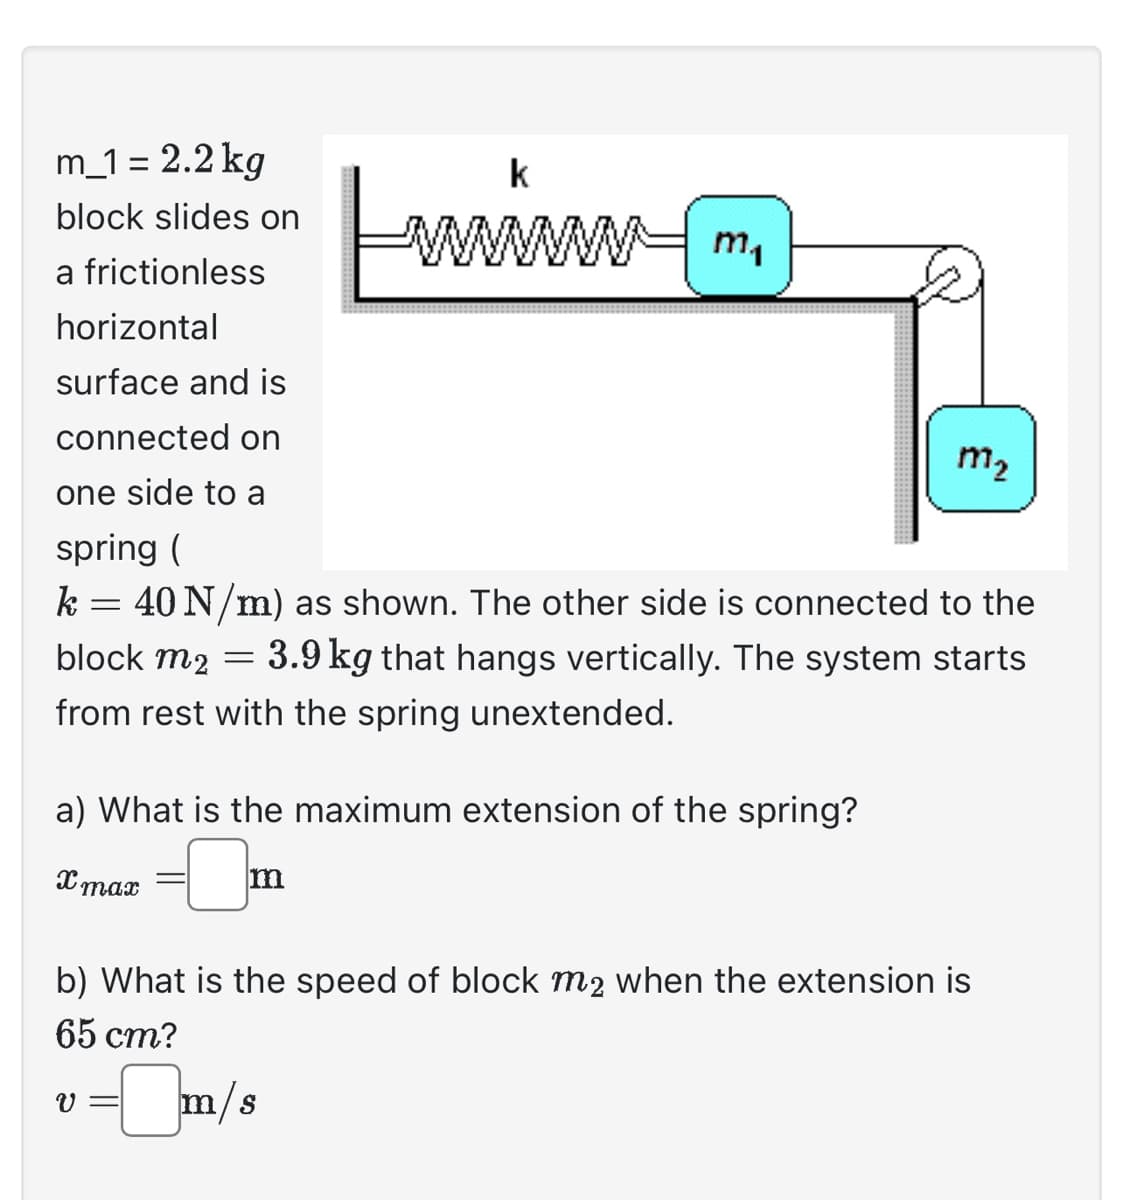 m_1= 2.2 kg
block slides on
a frictionless
horizontal
surface and is
connected on
one side to a
k
wwwwwwww m₁
m₂
spring (
k = 40 N/m) as shown. The other side is connected to the
block m2 = 3.9 kg that hangs vertically. The system starts
from rest with the spring unextended.
a) What is the maximum extension of the spring?
x max
-0₂
m
b) What is the speed of block m2 when the extension is
65 cm?
v = m/s